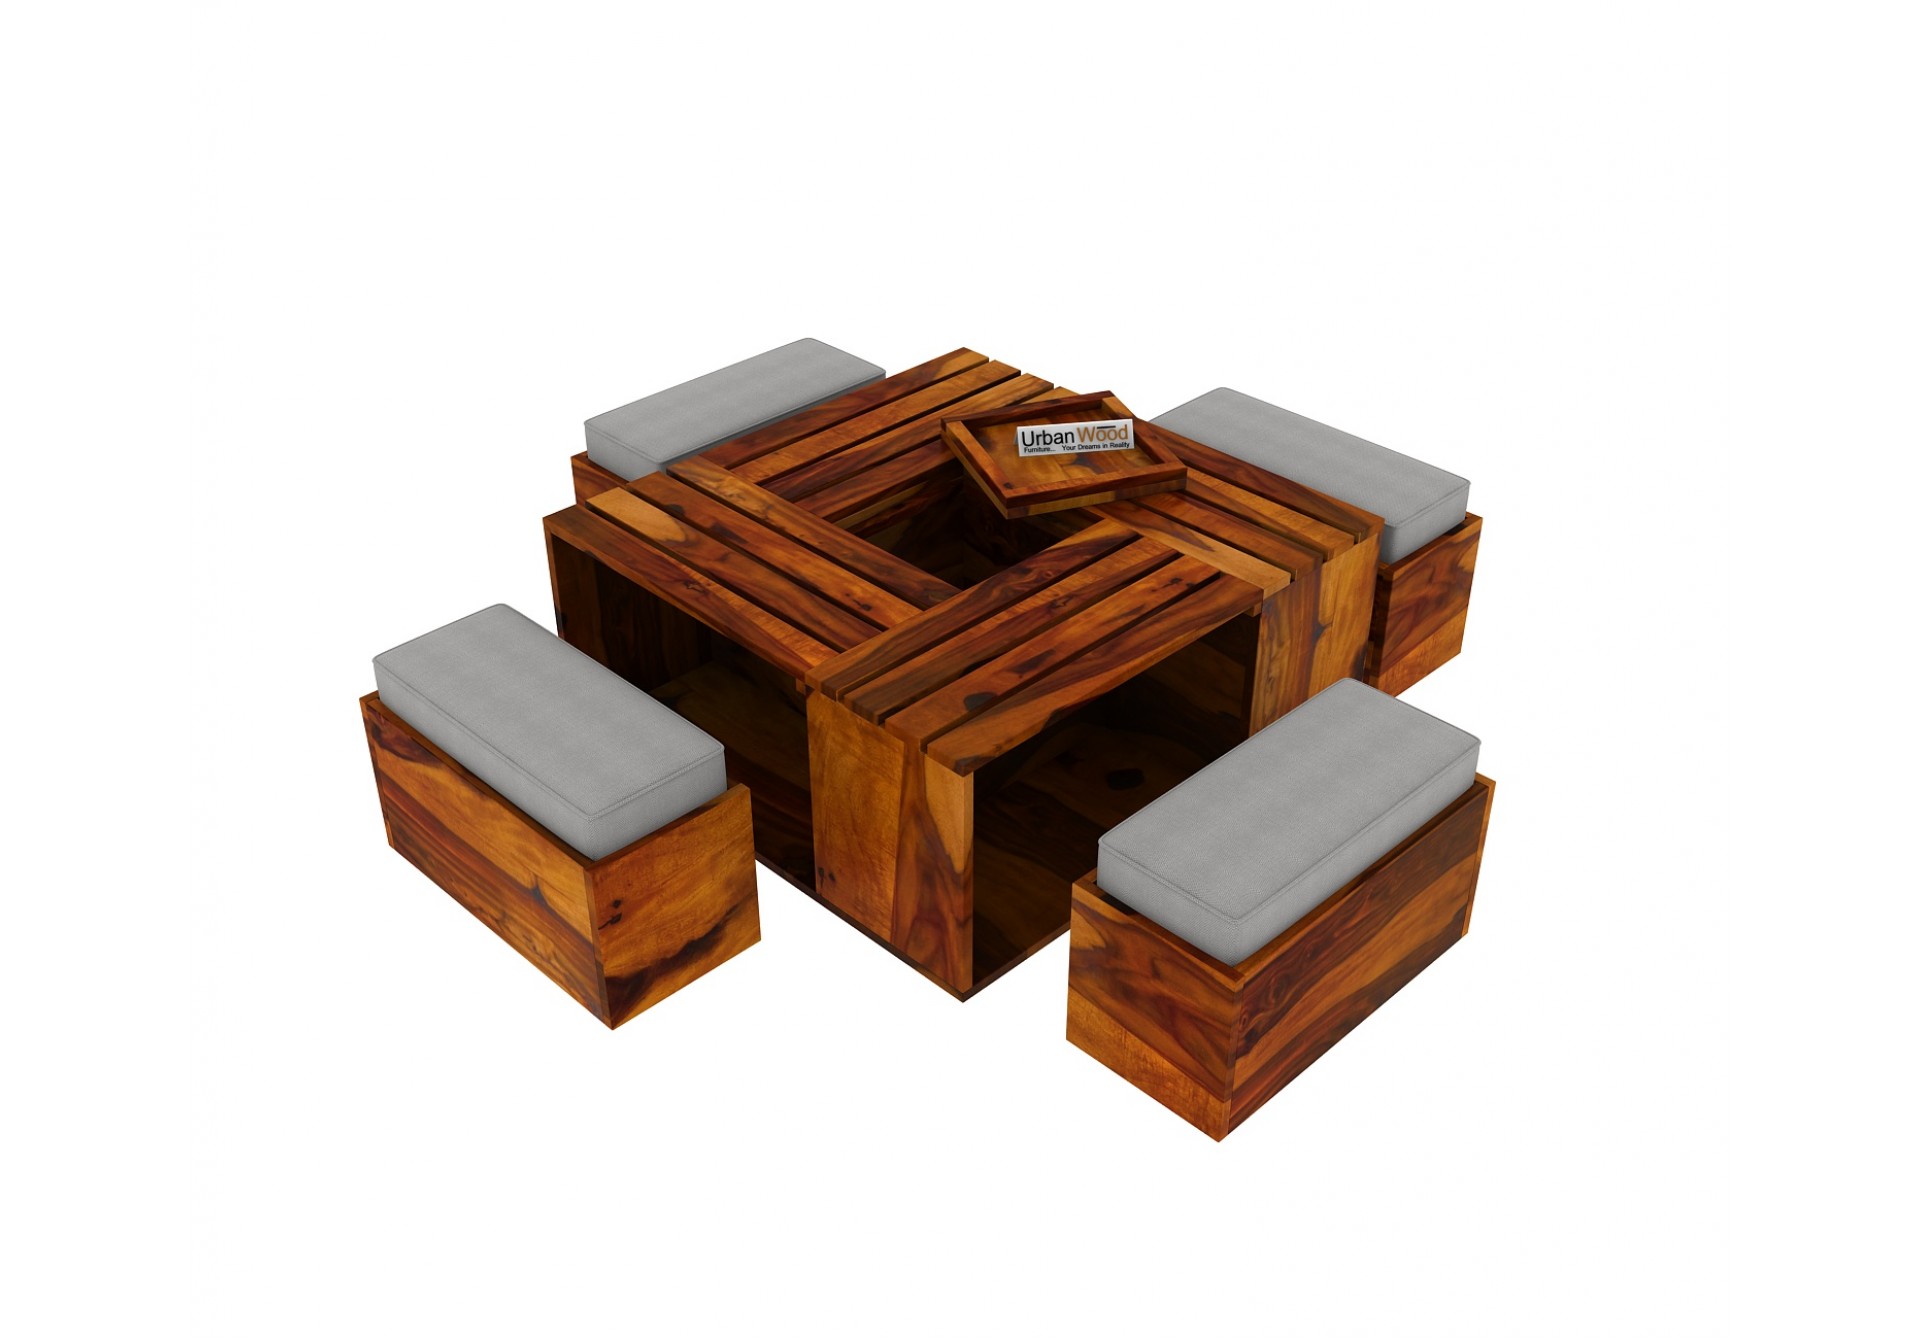 Bliss Coffee Table Sets ( Honey Finish )